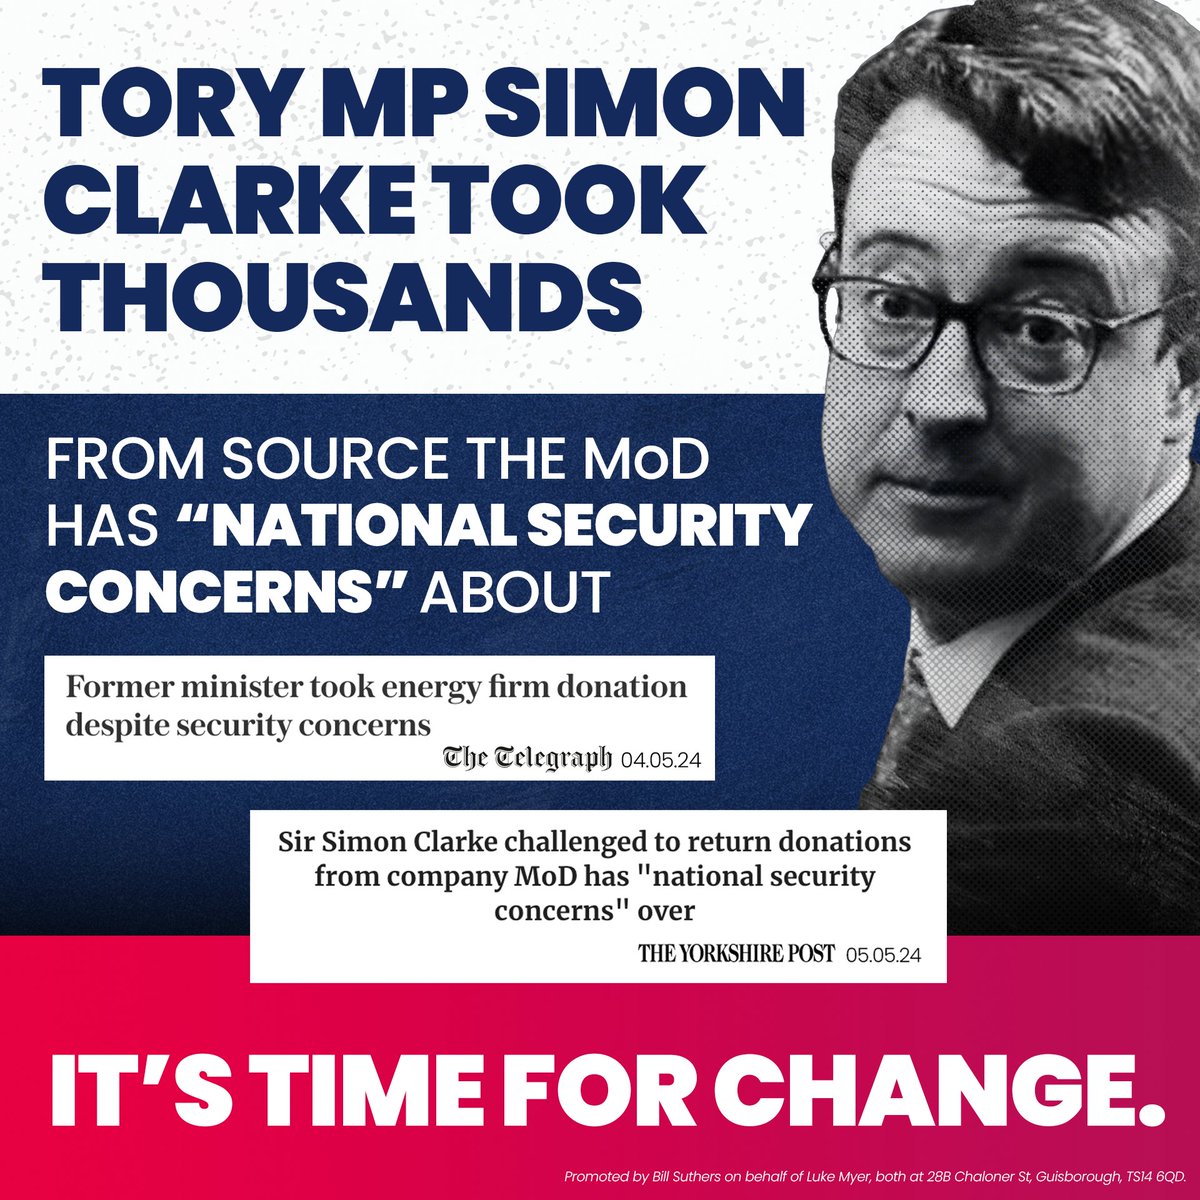 The @Telegraph @YorkshirePost have raised alarms over Simon Clarke's donations. He took thousands from a company AFTER @DefenceHQ raised 'significant national security concerns' about it. He thinks he can buy your vote- and he doesn't appear to care where the money comes from.